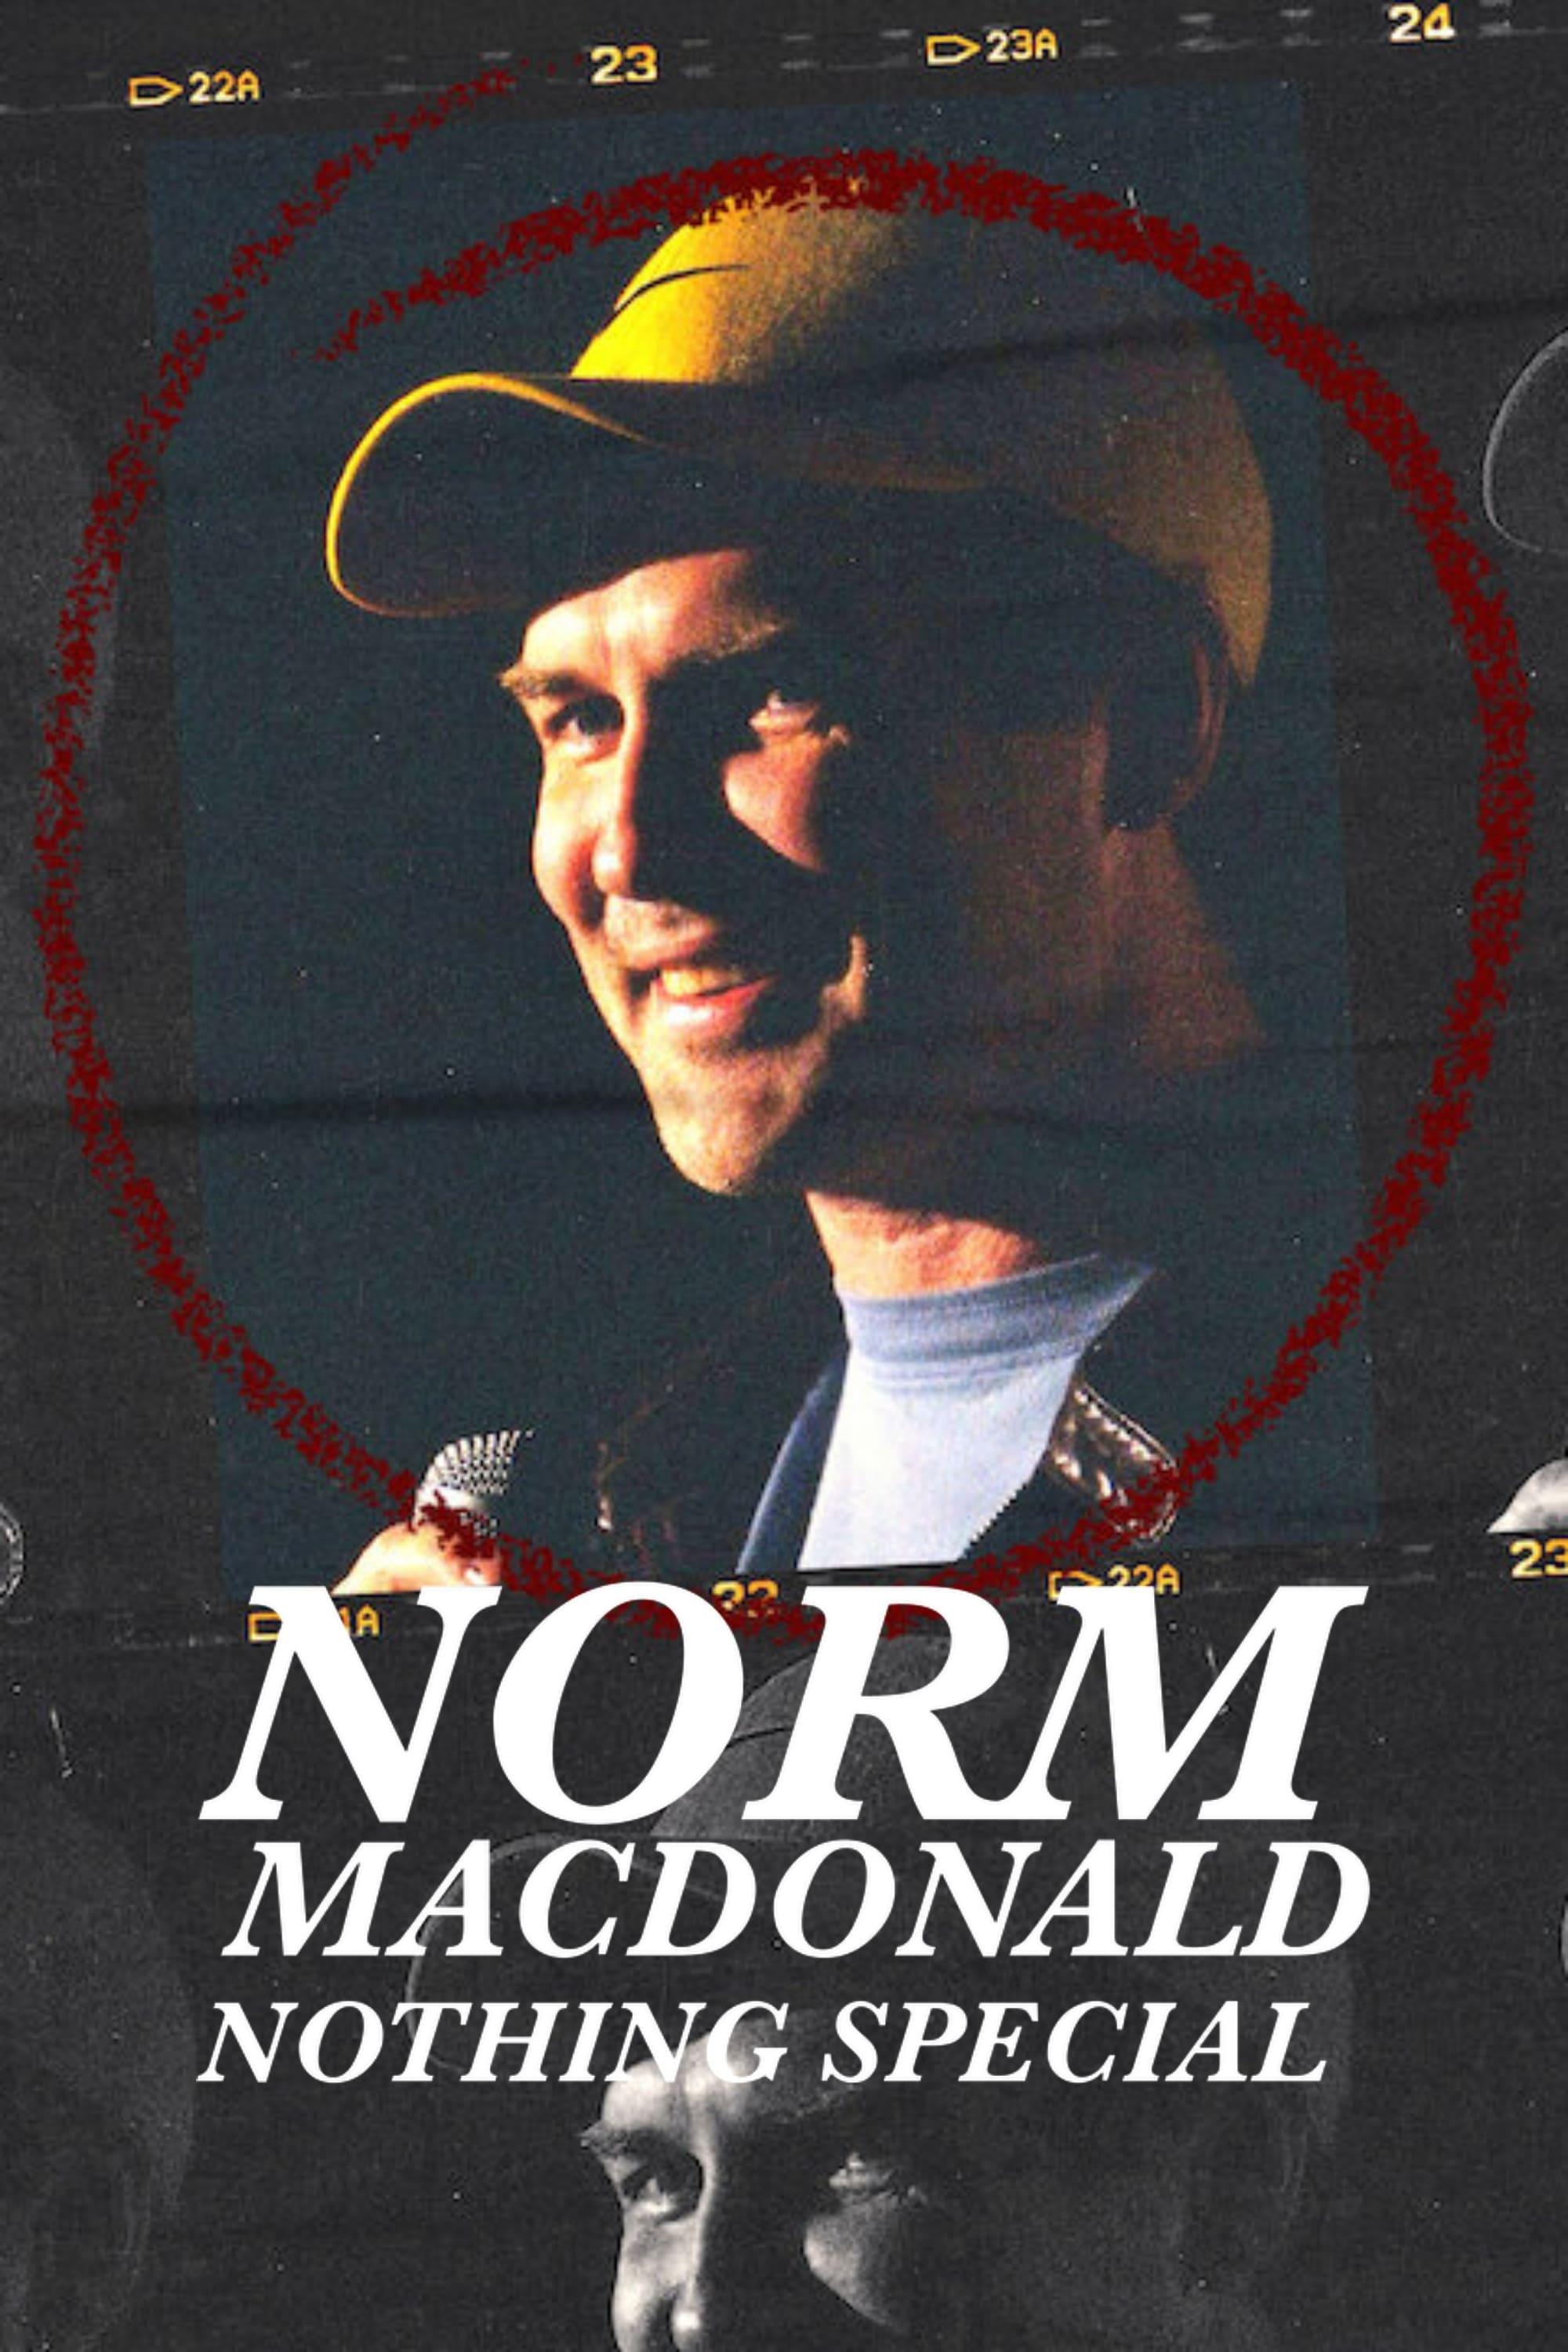 Norm Macdonald: Nothing Special poster